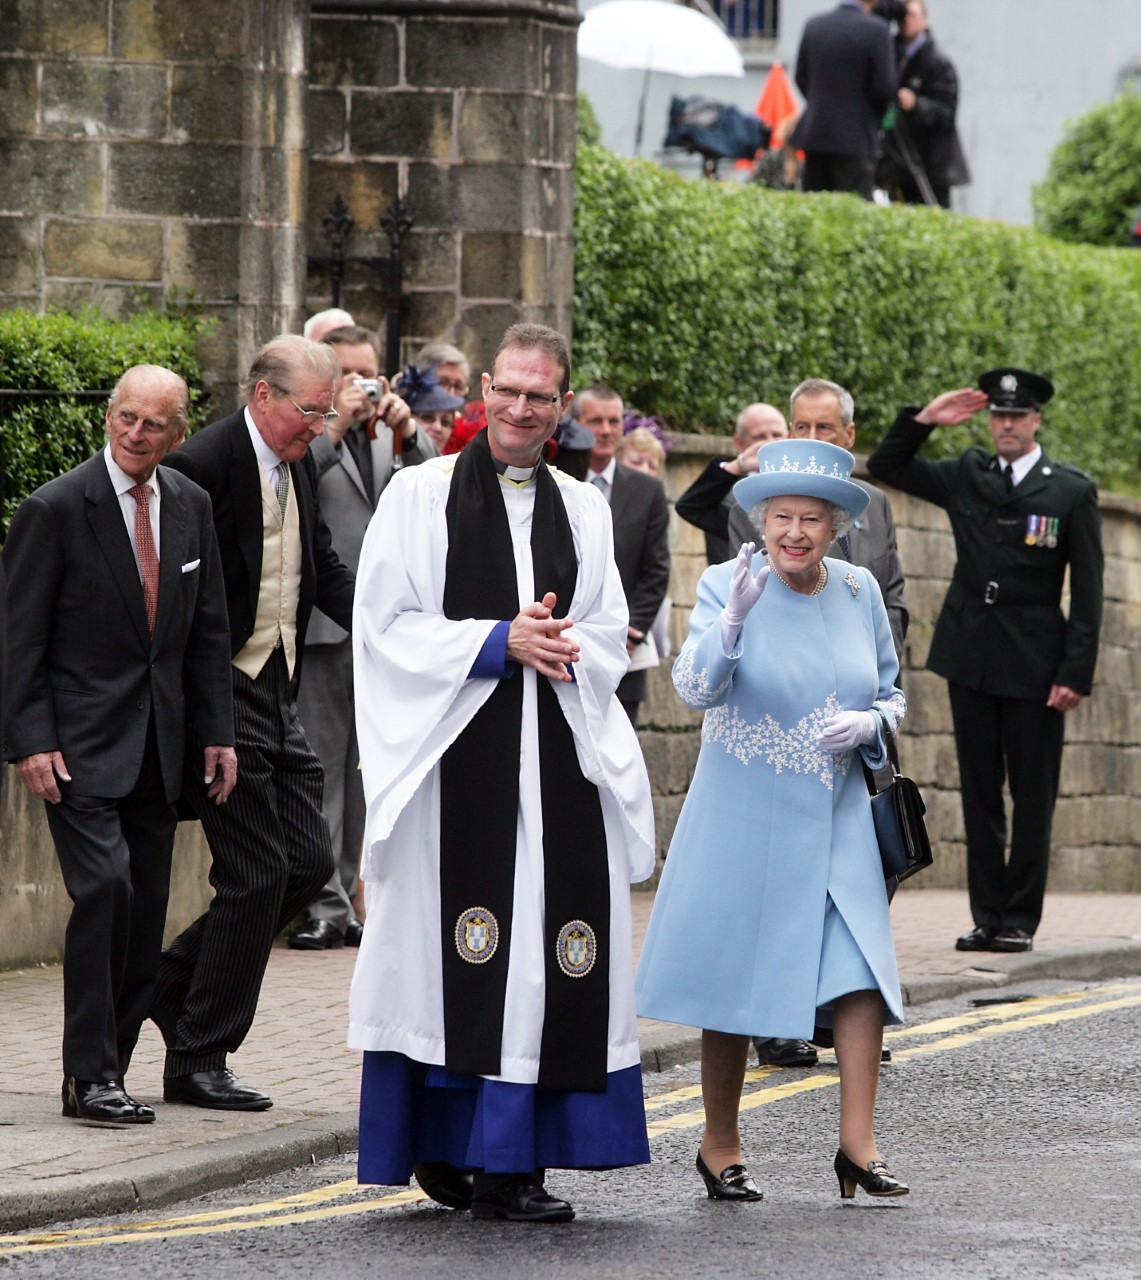 HM The Queen pictured with Dean Kenny Hall during her visit to Enniskillen in 2012. Photo: John McVitty.